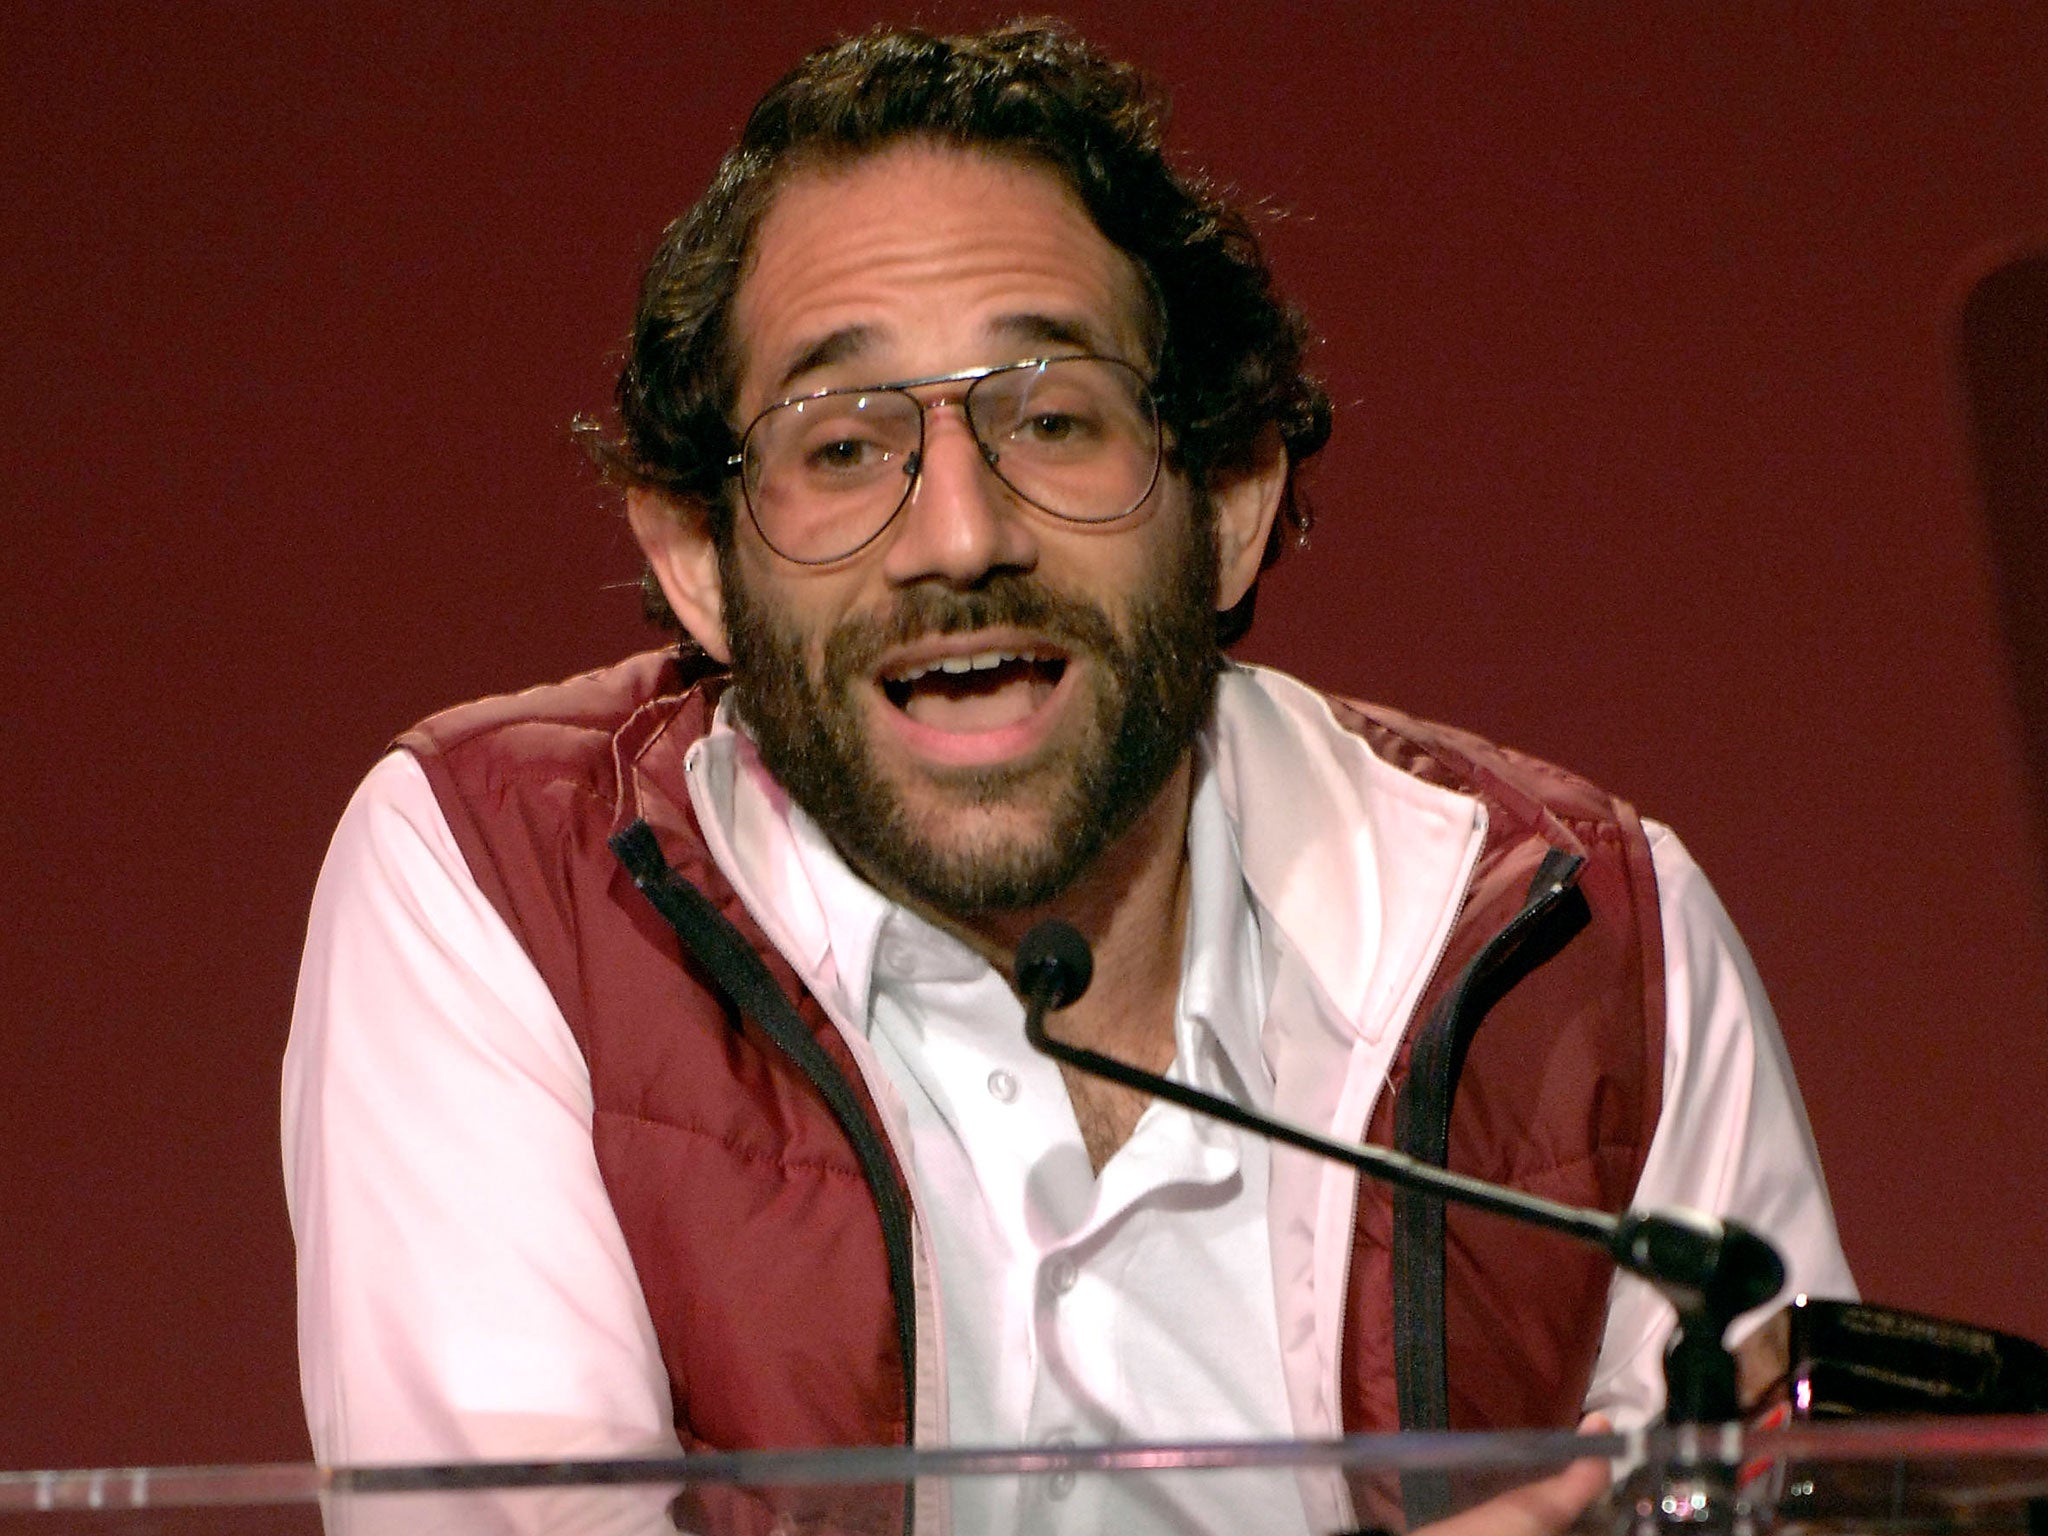 American Apparel's Dov Charney speaks at the LA Fashion Awards at the Orpheum Theatre on October 21, 2005 in Los Angeles, California